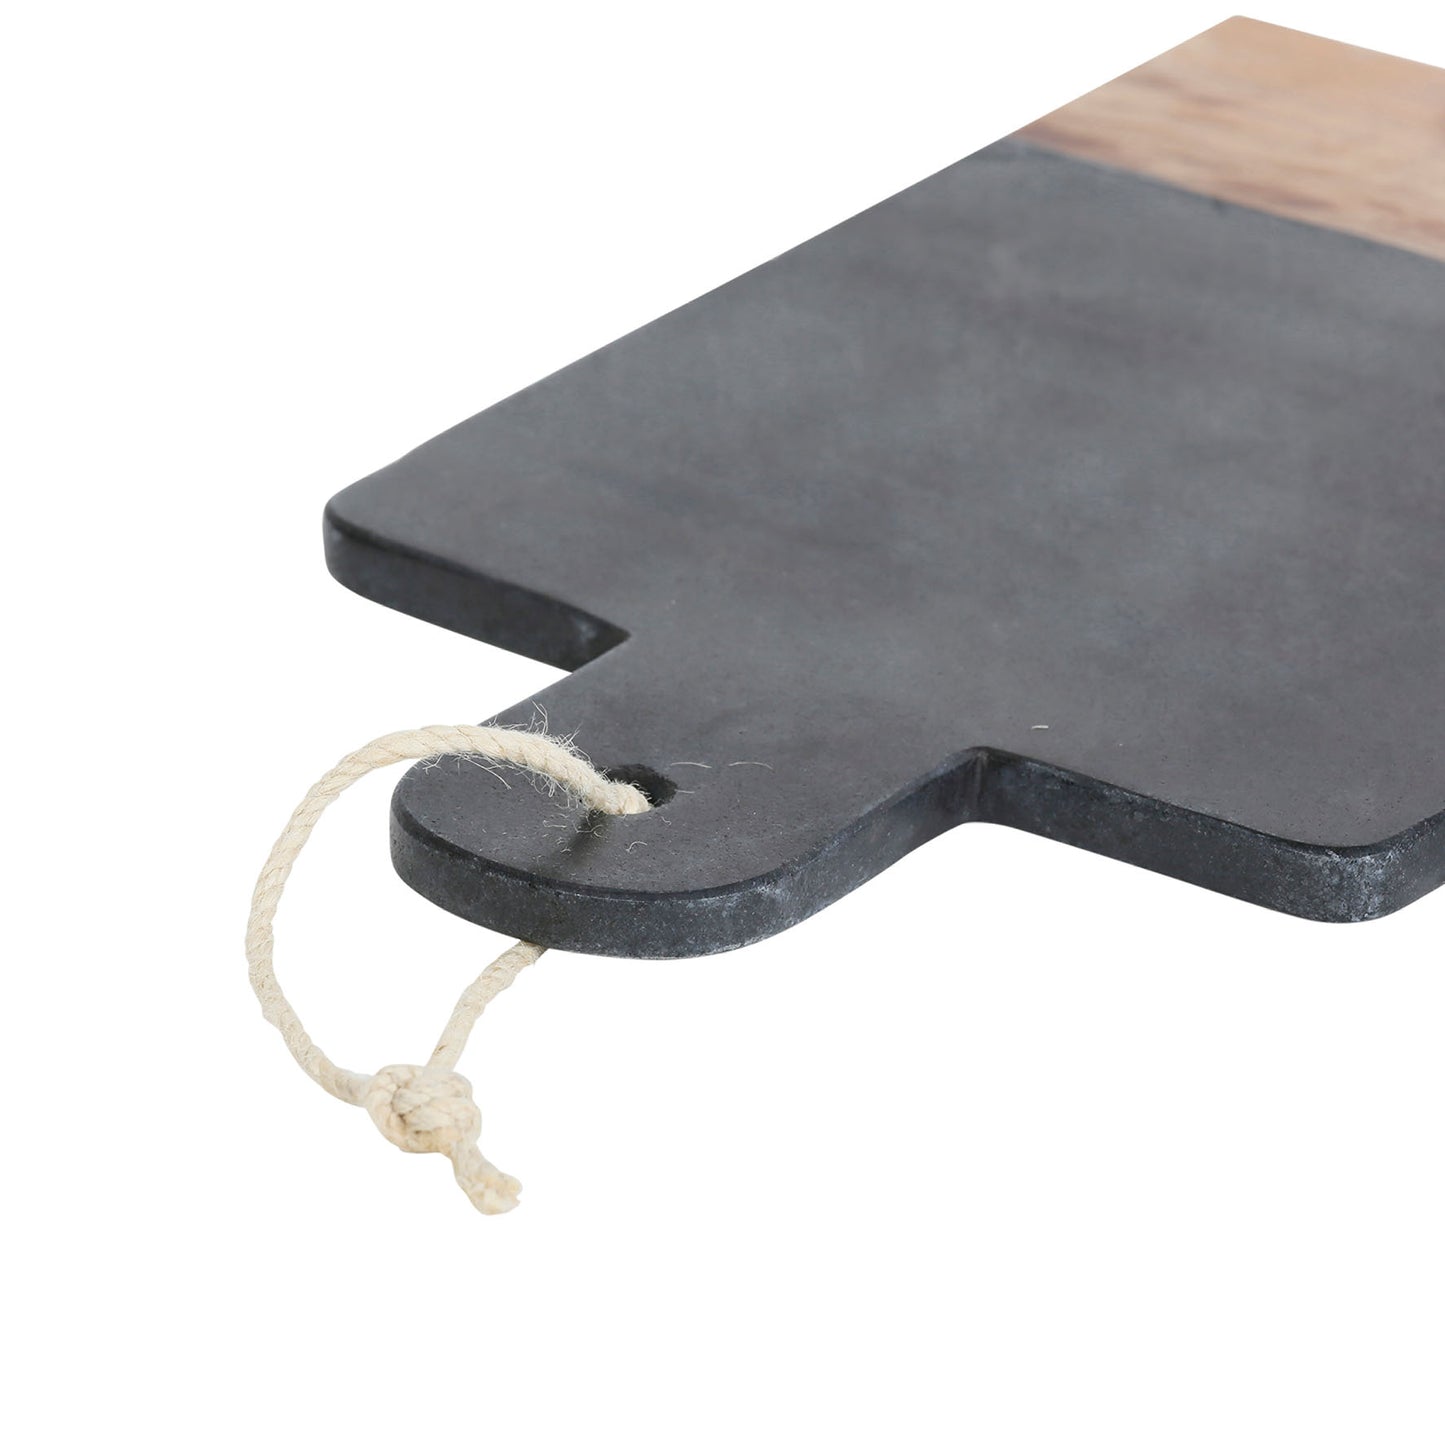 Black marble & wood rectangular cutting board with cord